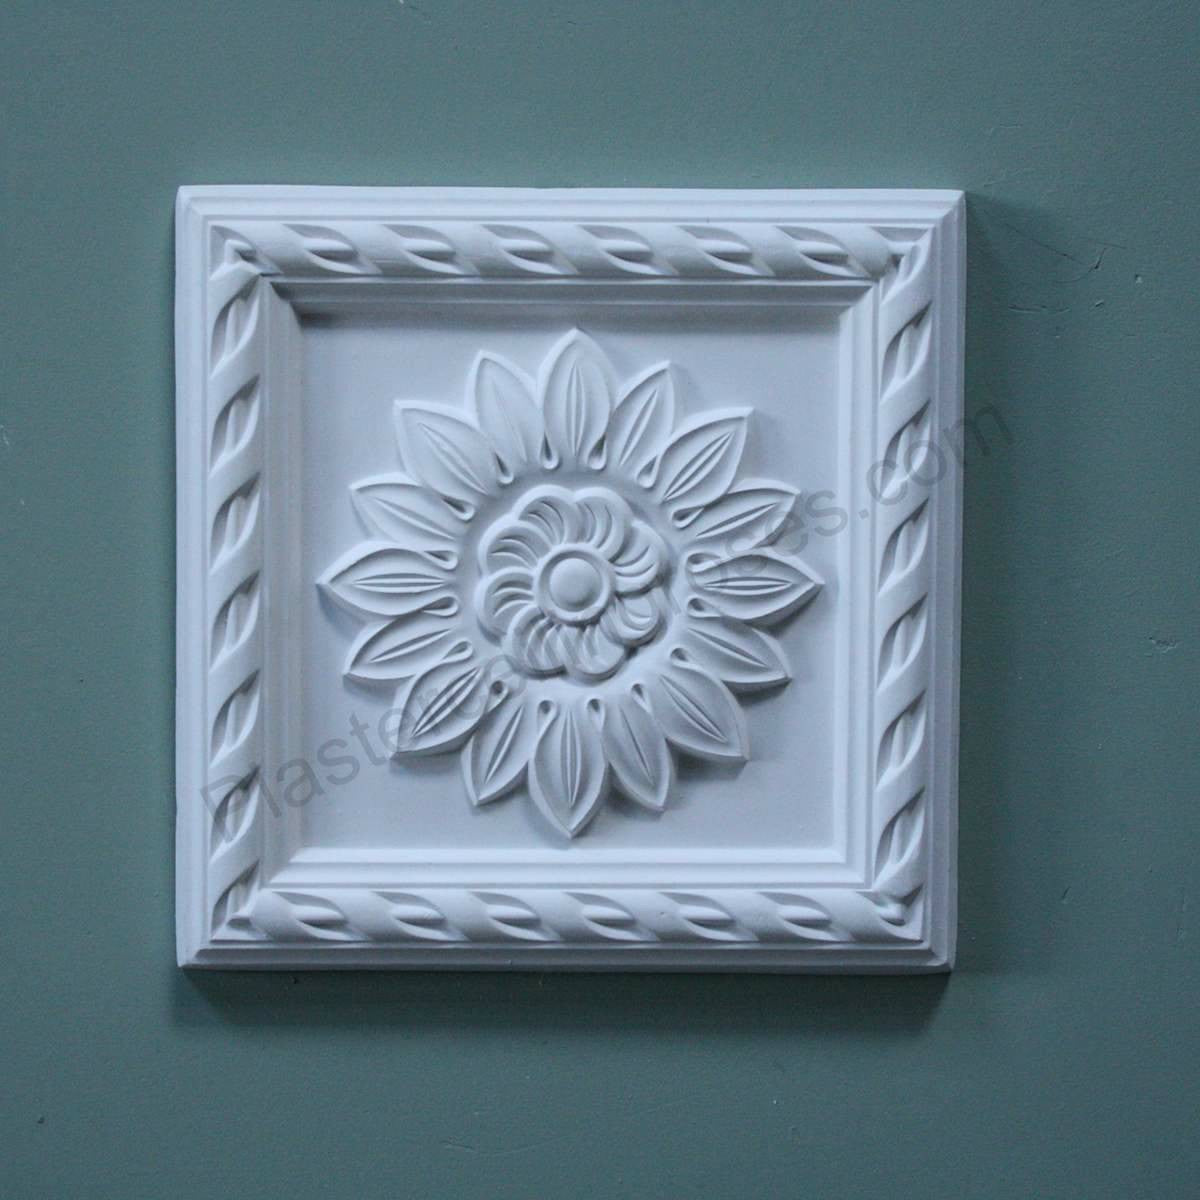 Sunflower Plaster Wall Plaque from above